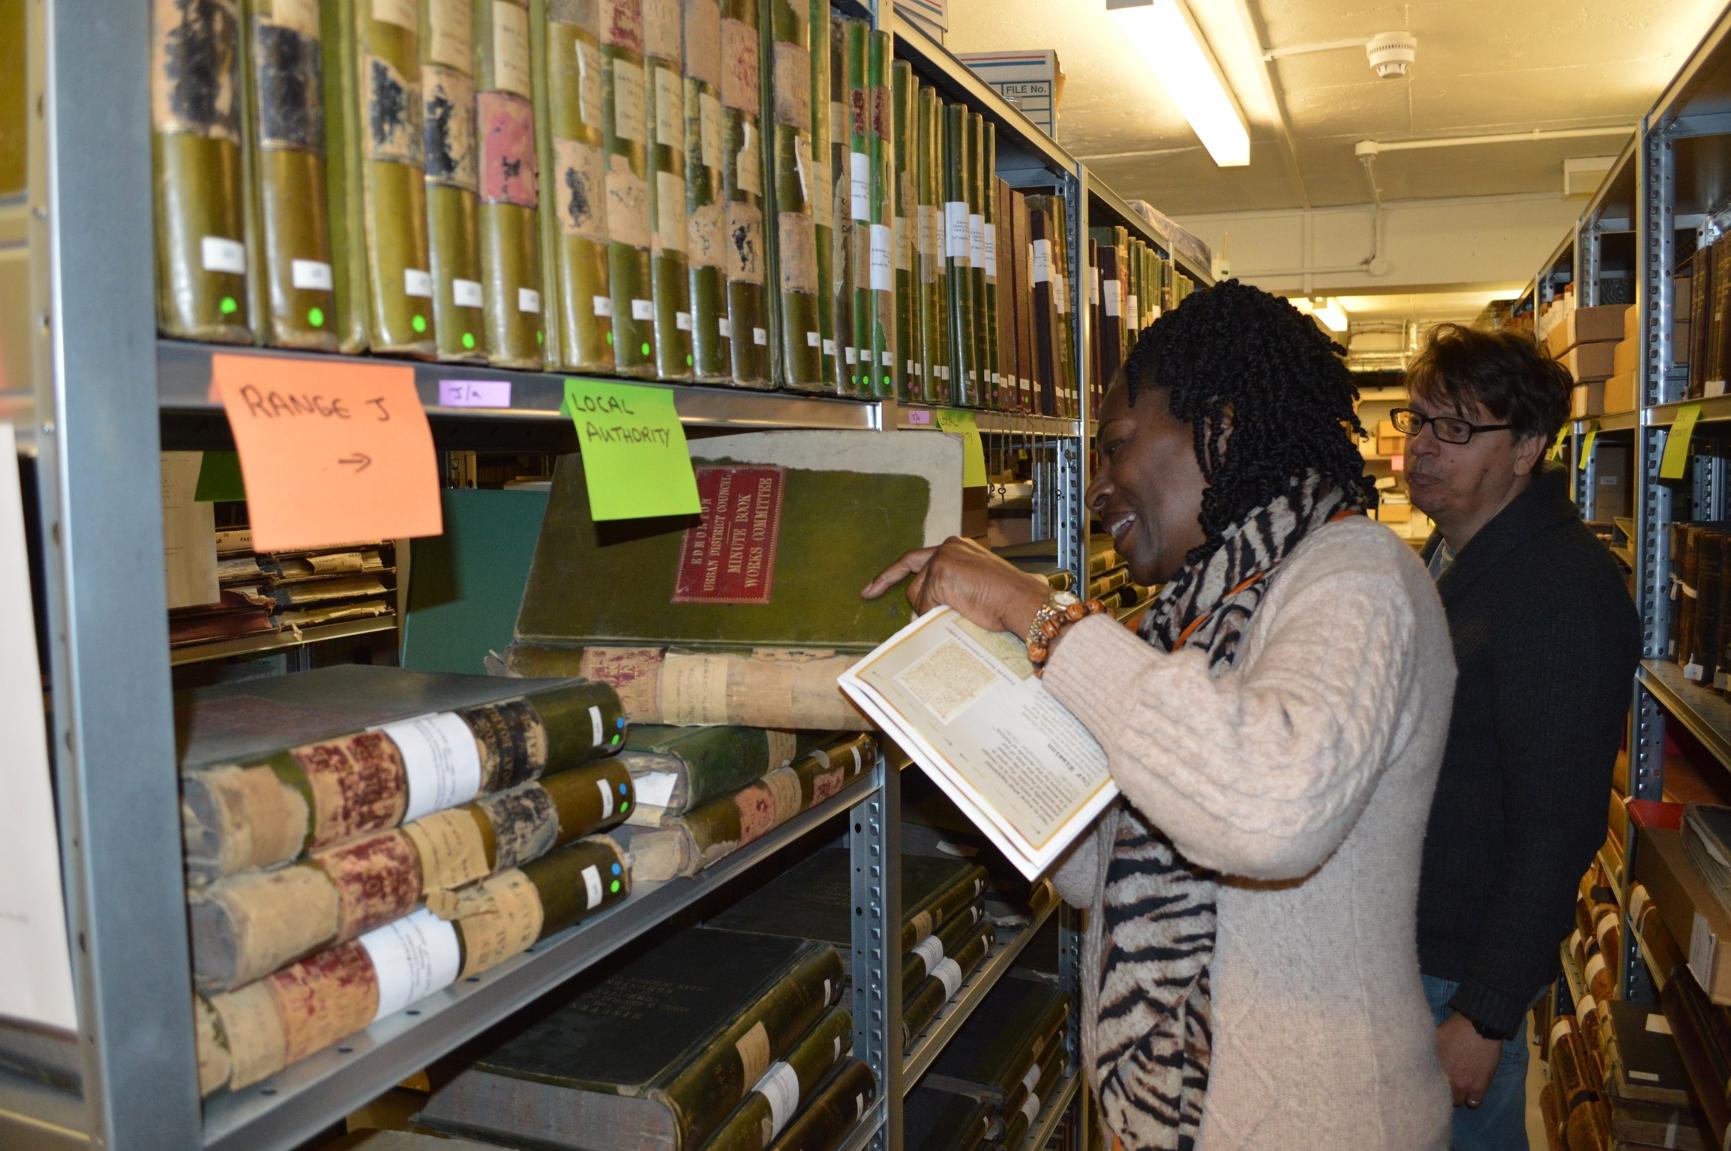 ECA contributes Windrush books, films and materials to Enfield Archives